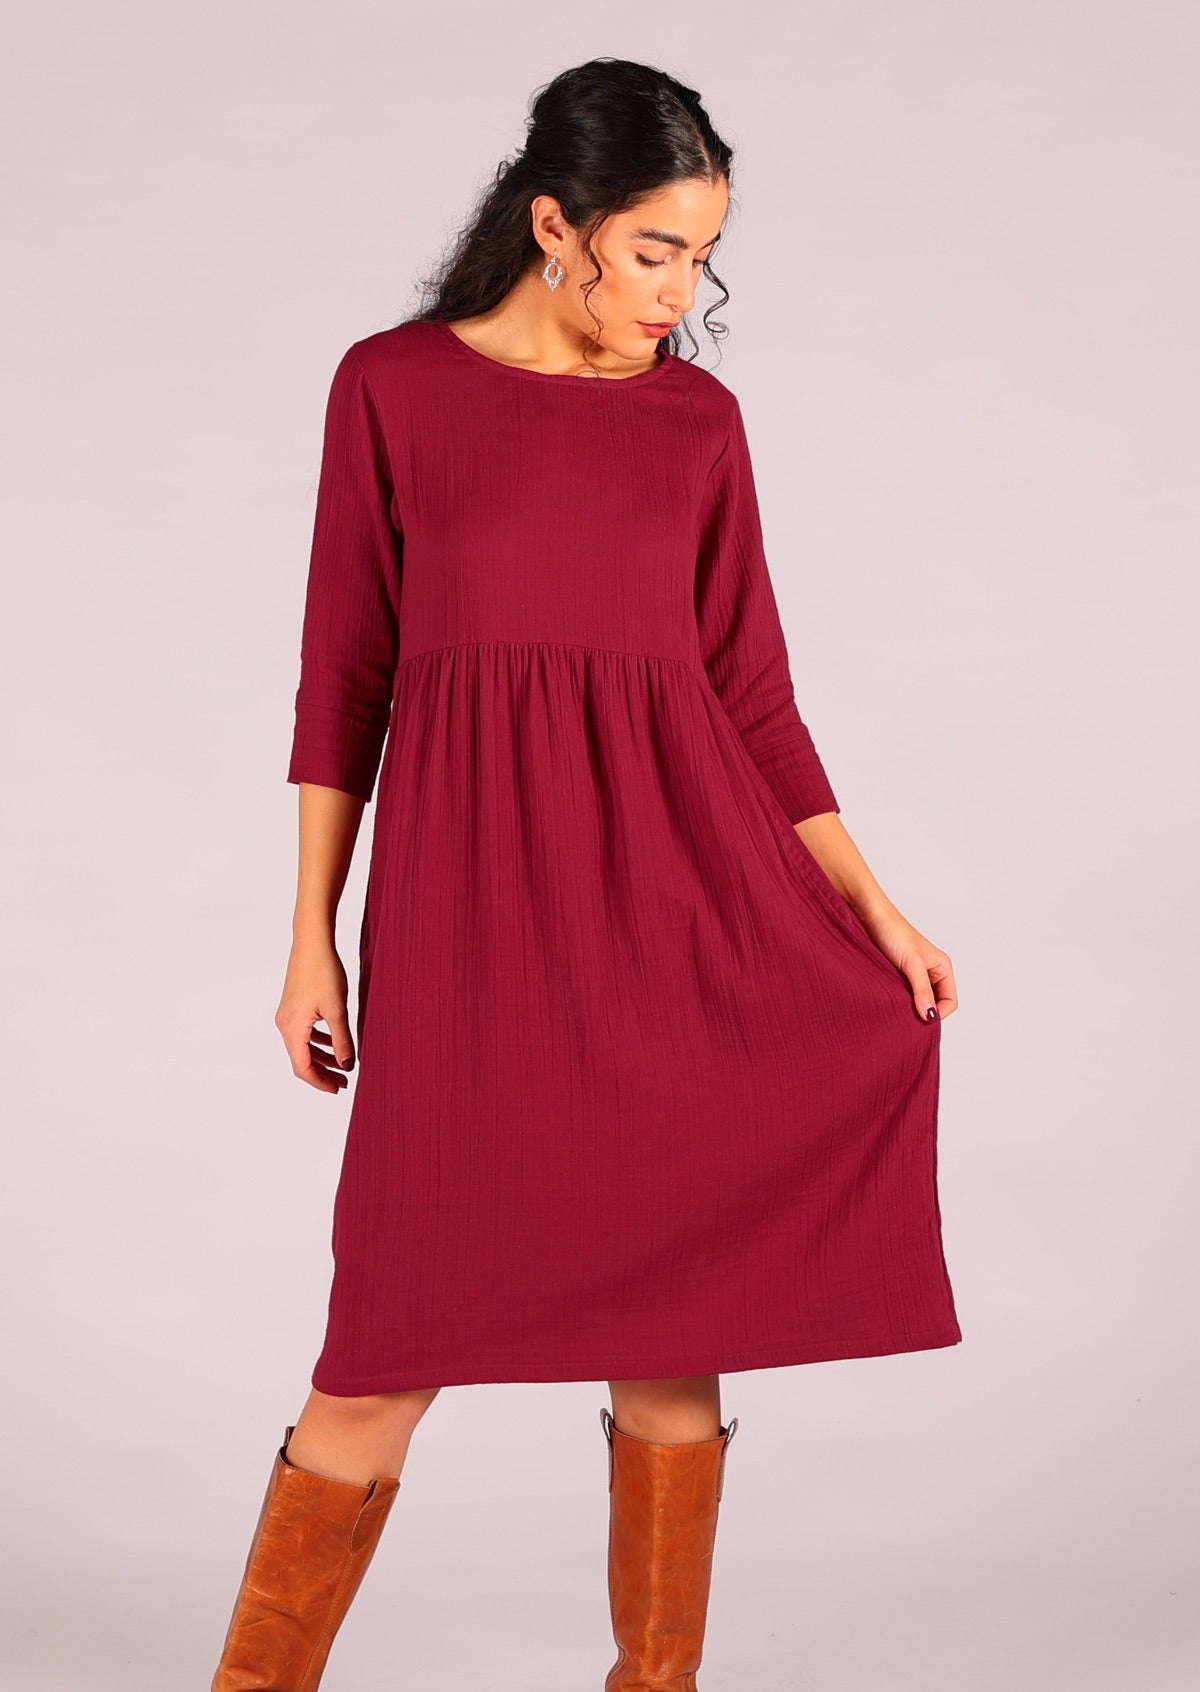 Deep red super comfortable double cotton dress with round neckline